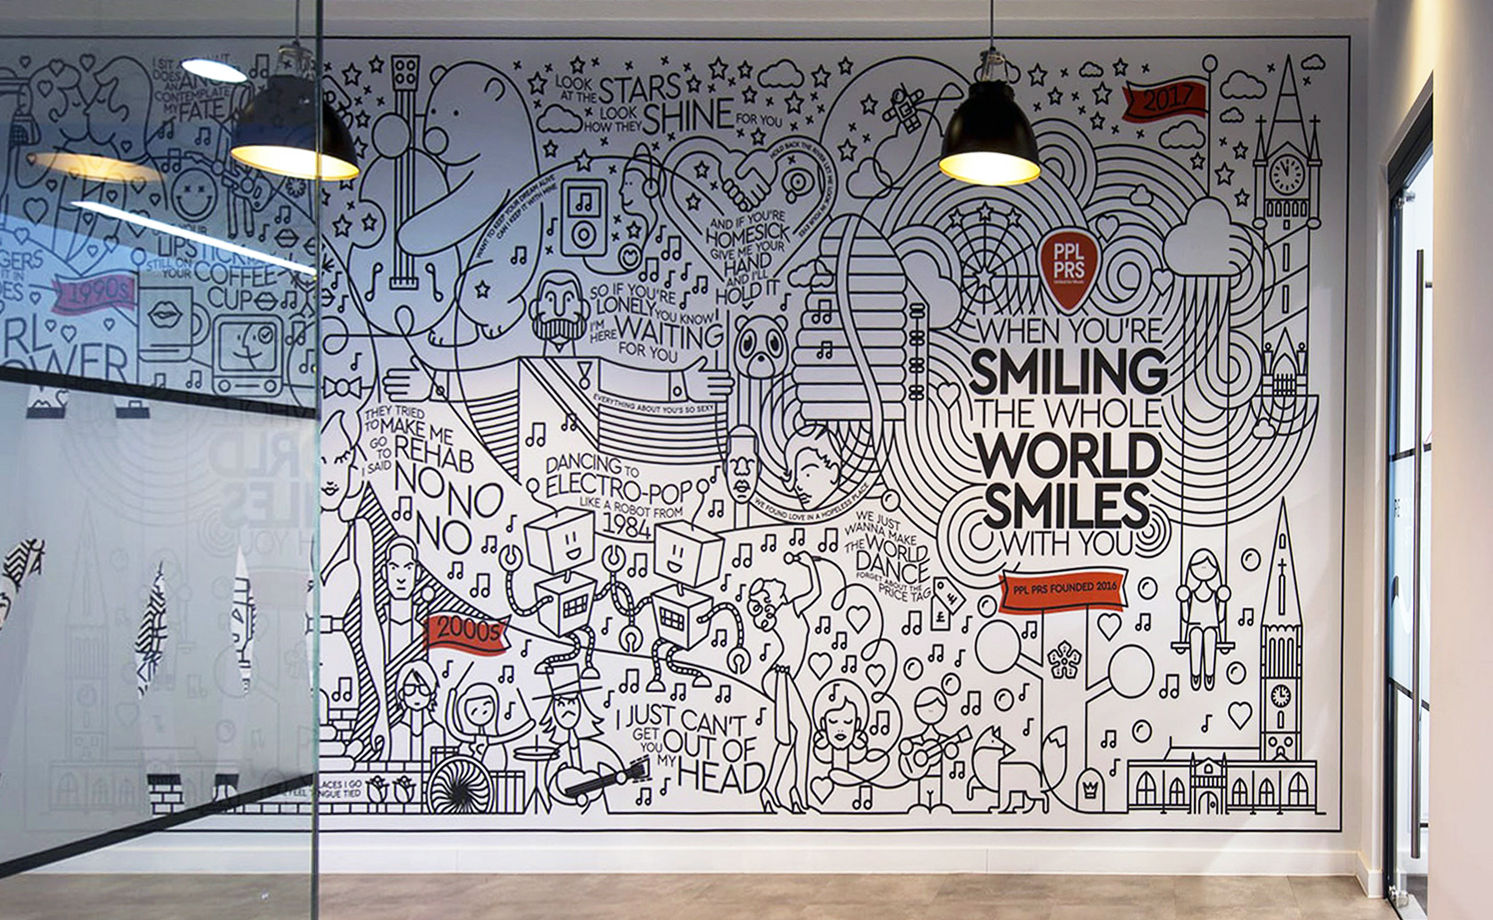 Wonderful Wall Art & Graphics For Offices - Be Inspired